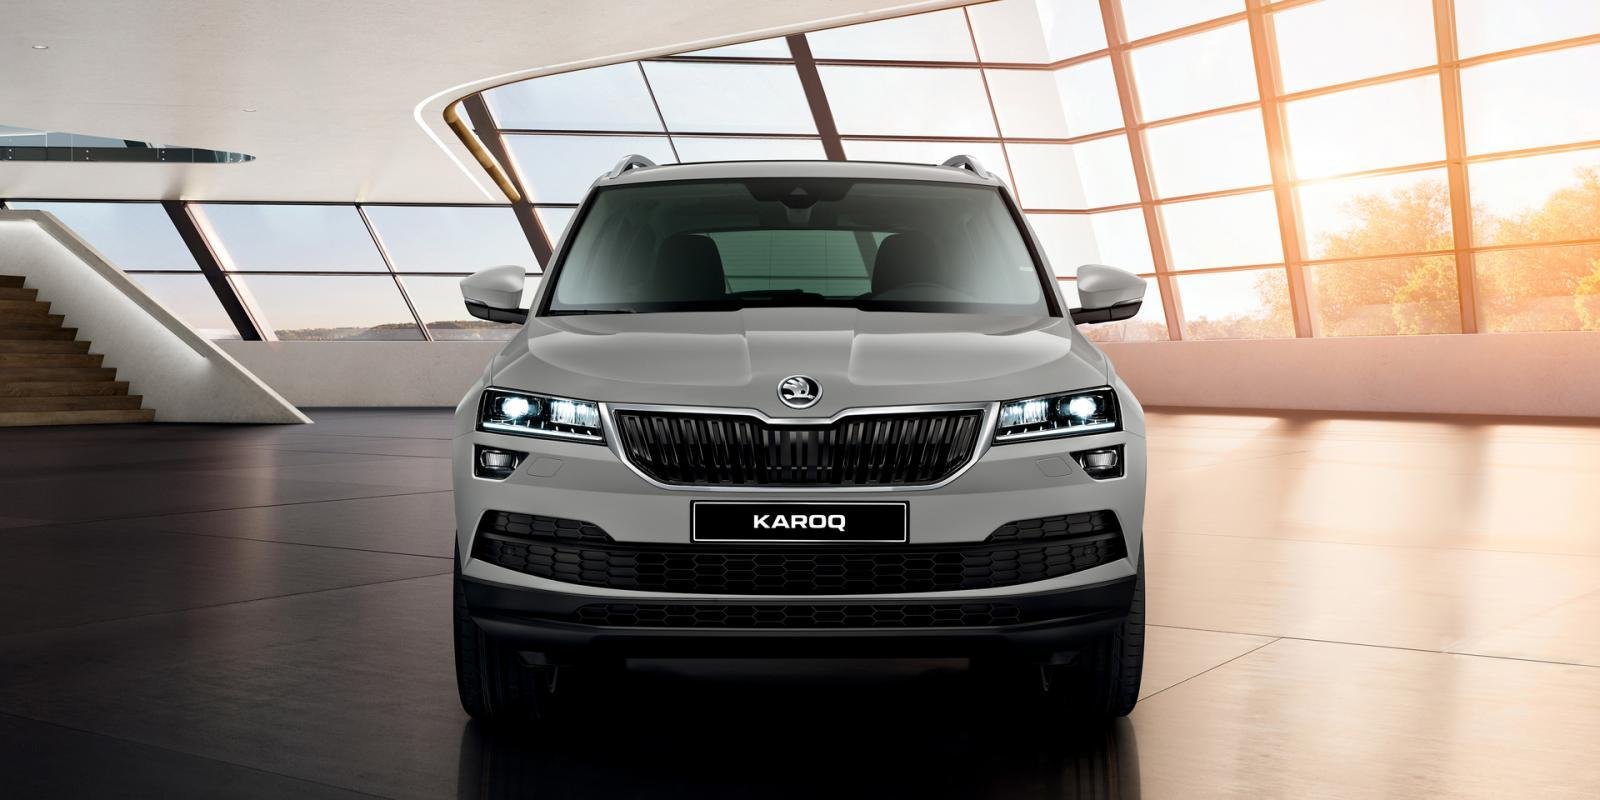 Skoda Karoq Will Be Relaunched As A Locally Assembled Model In India